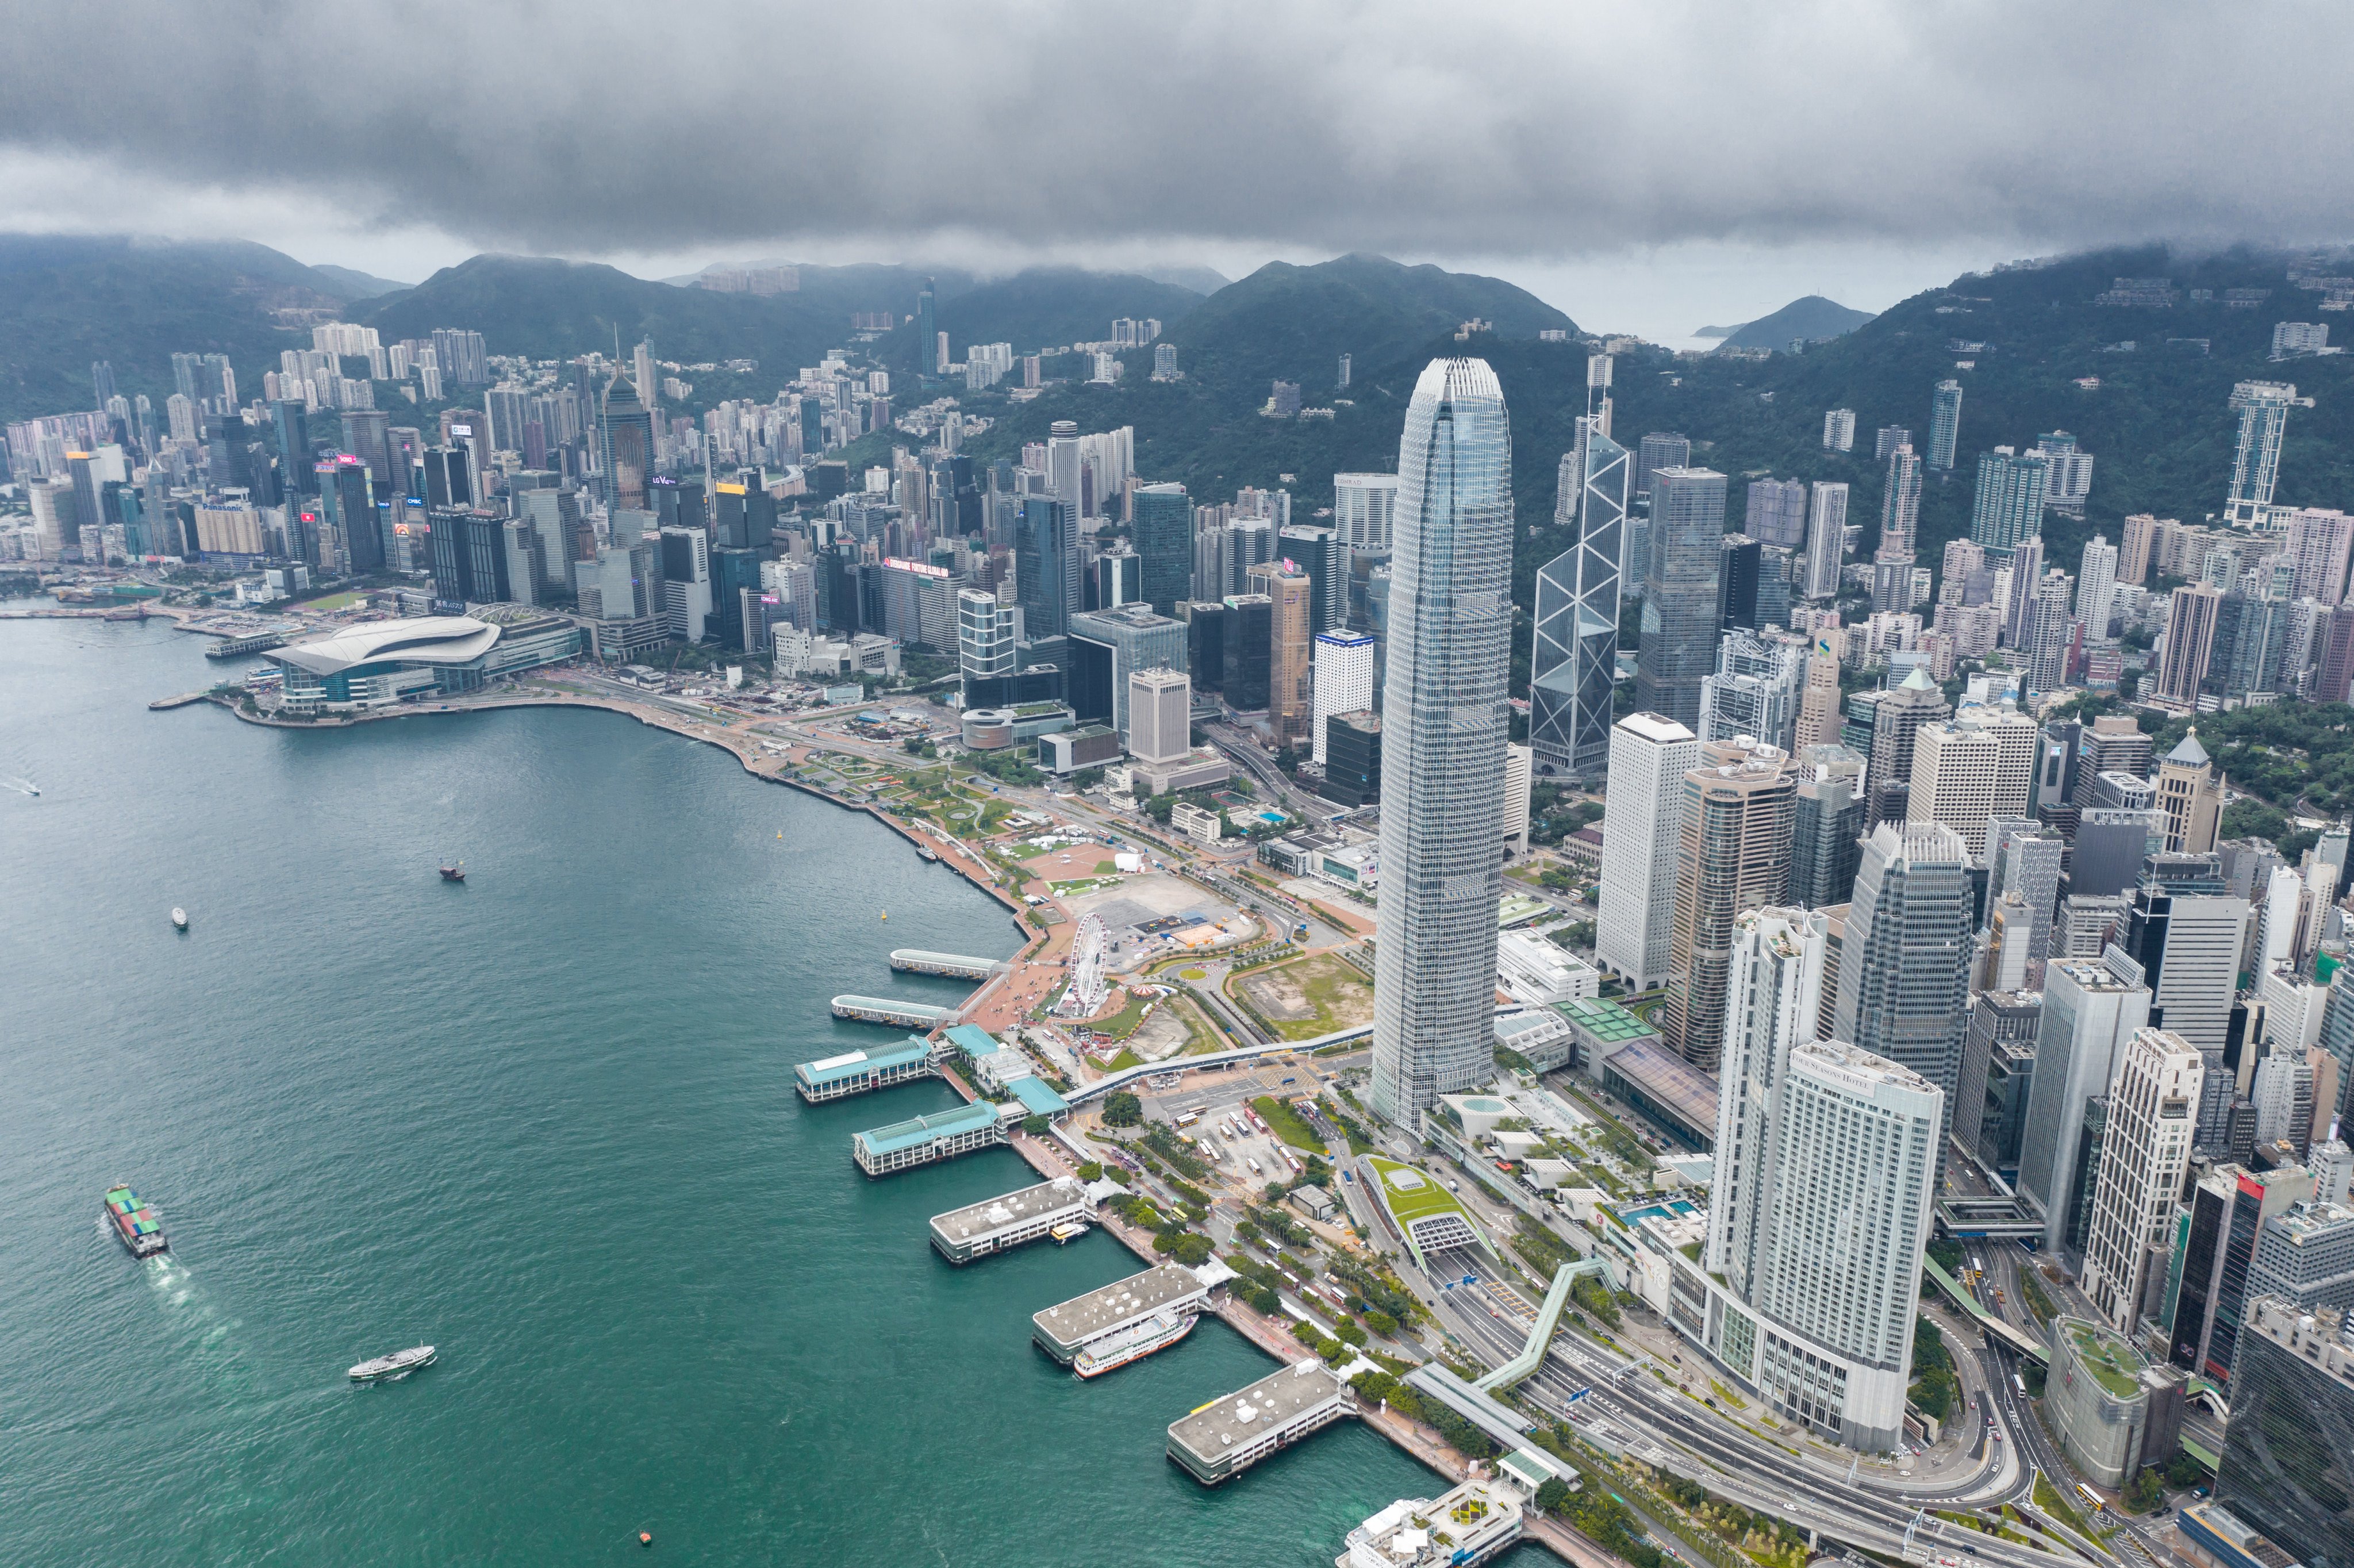 The skyline of Hong Kong. Photo: Getty Images